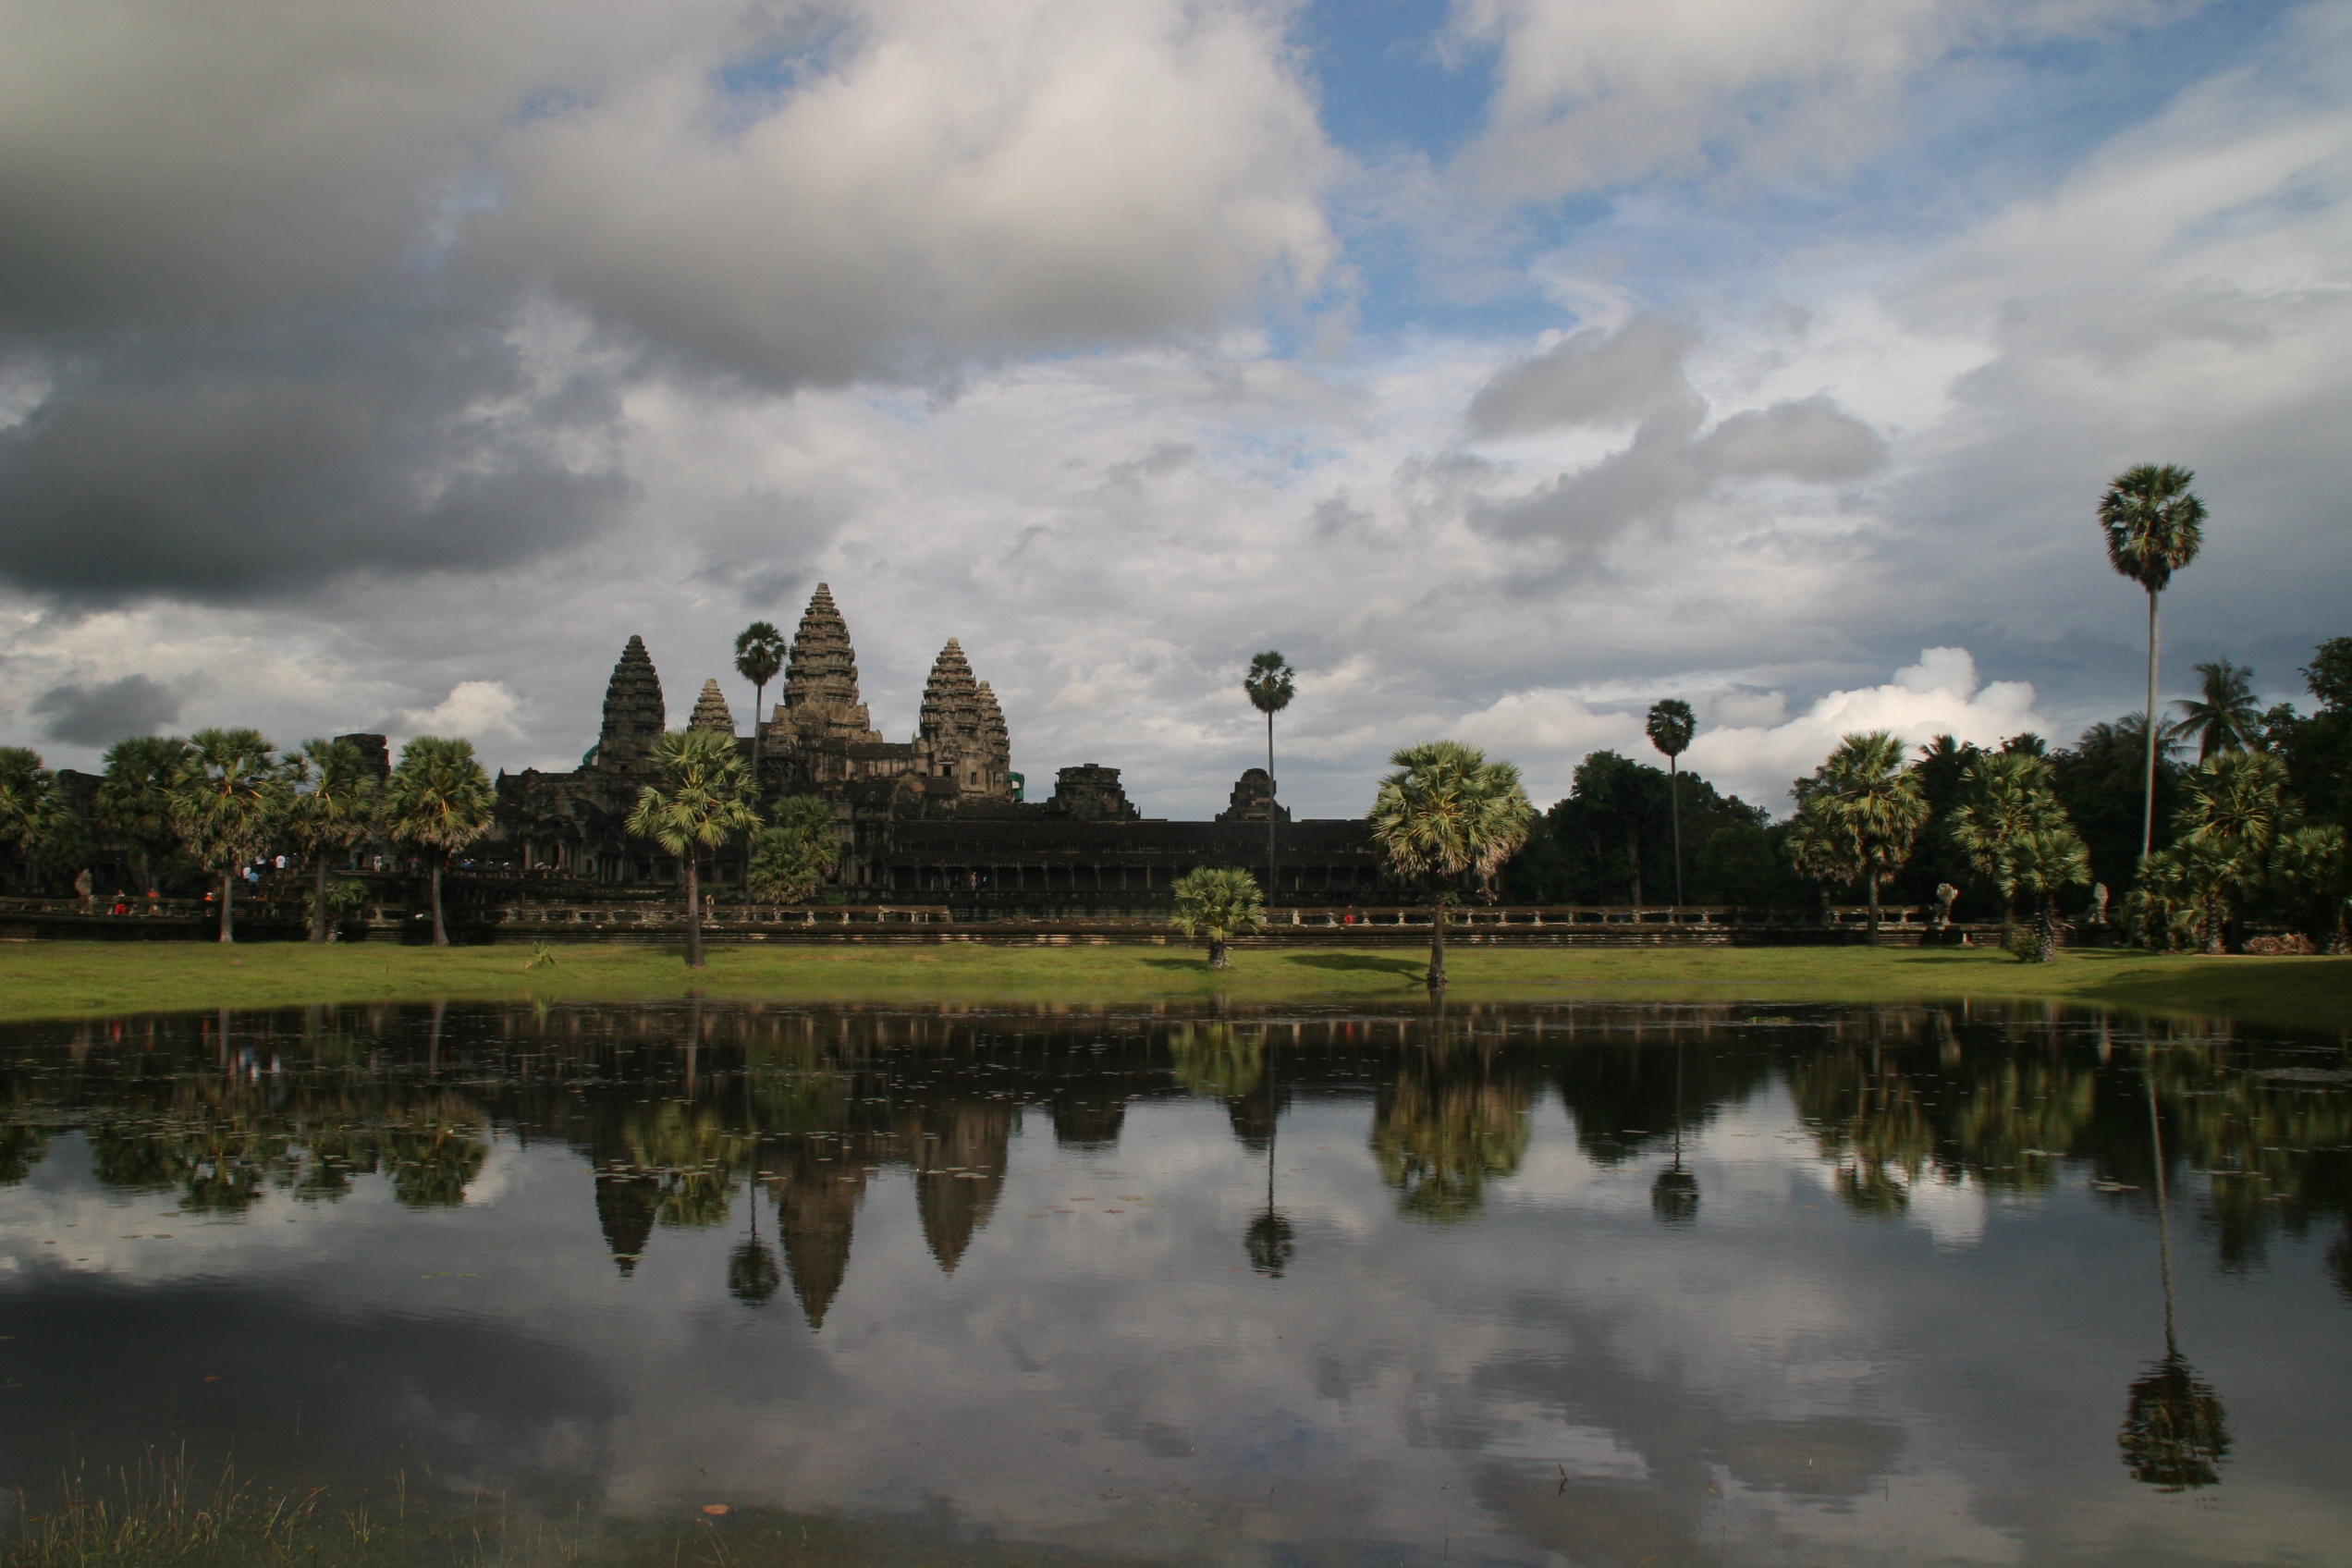 Khmers left Angkor Wat in 1432, after that it was lost in the jungle until a French explorer, Henri Mouhot, found it in 1860